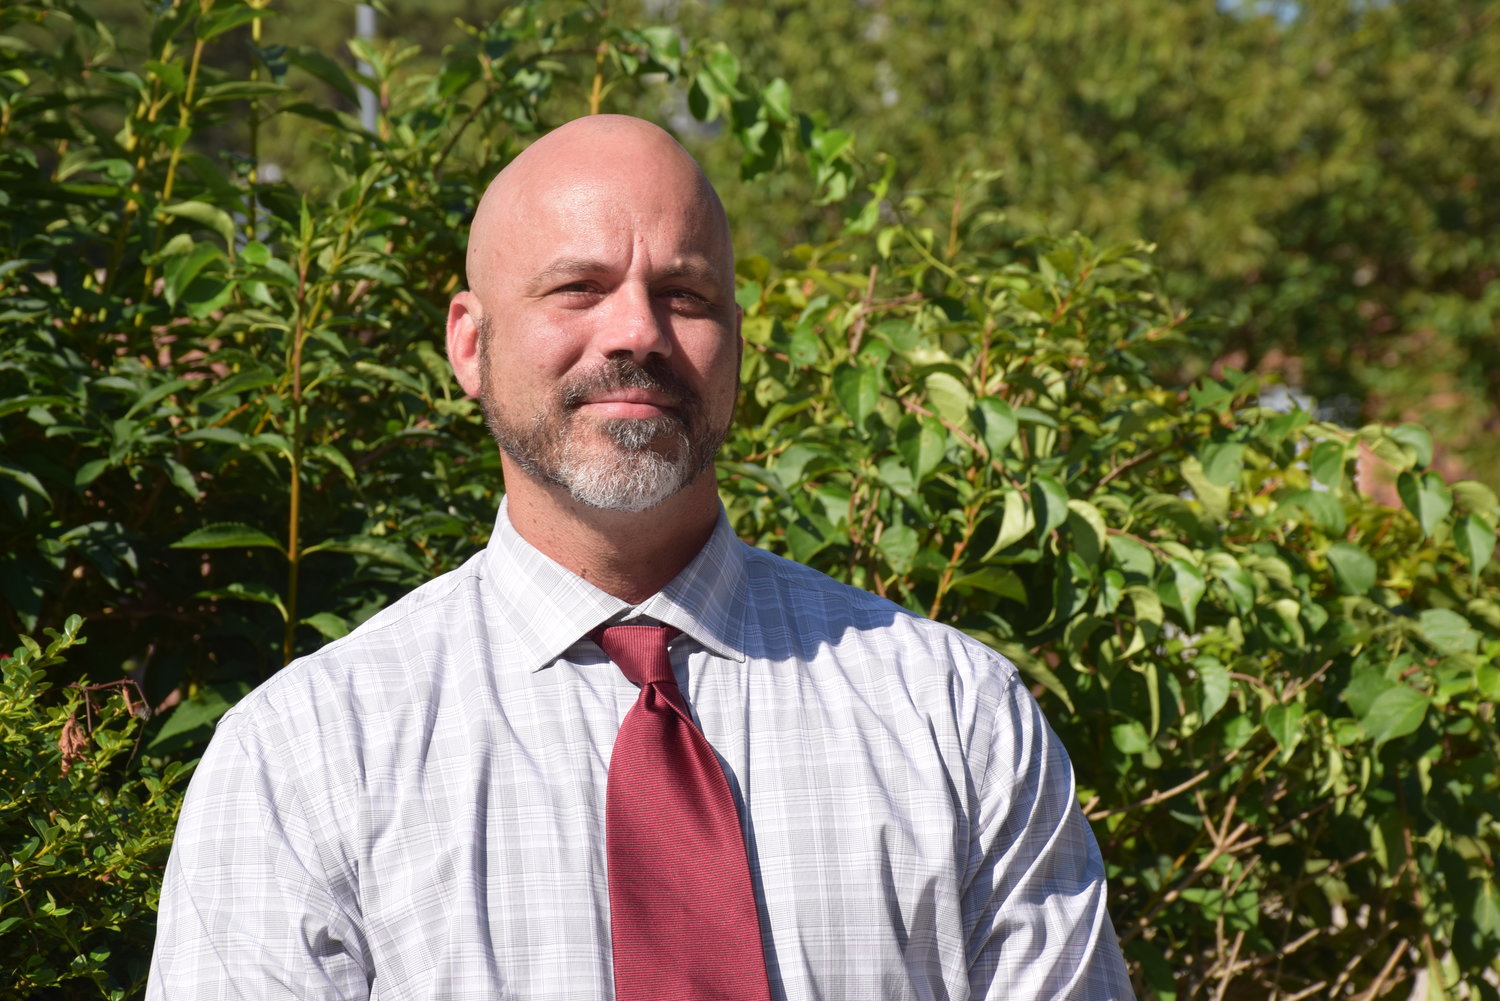 Former assistant principal of Oakdale-Bohemia Middle School, Joseph Piombo, will now take the reins as principal.